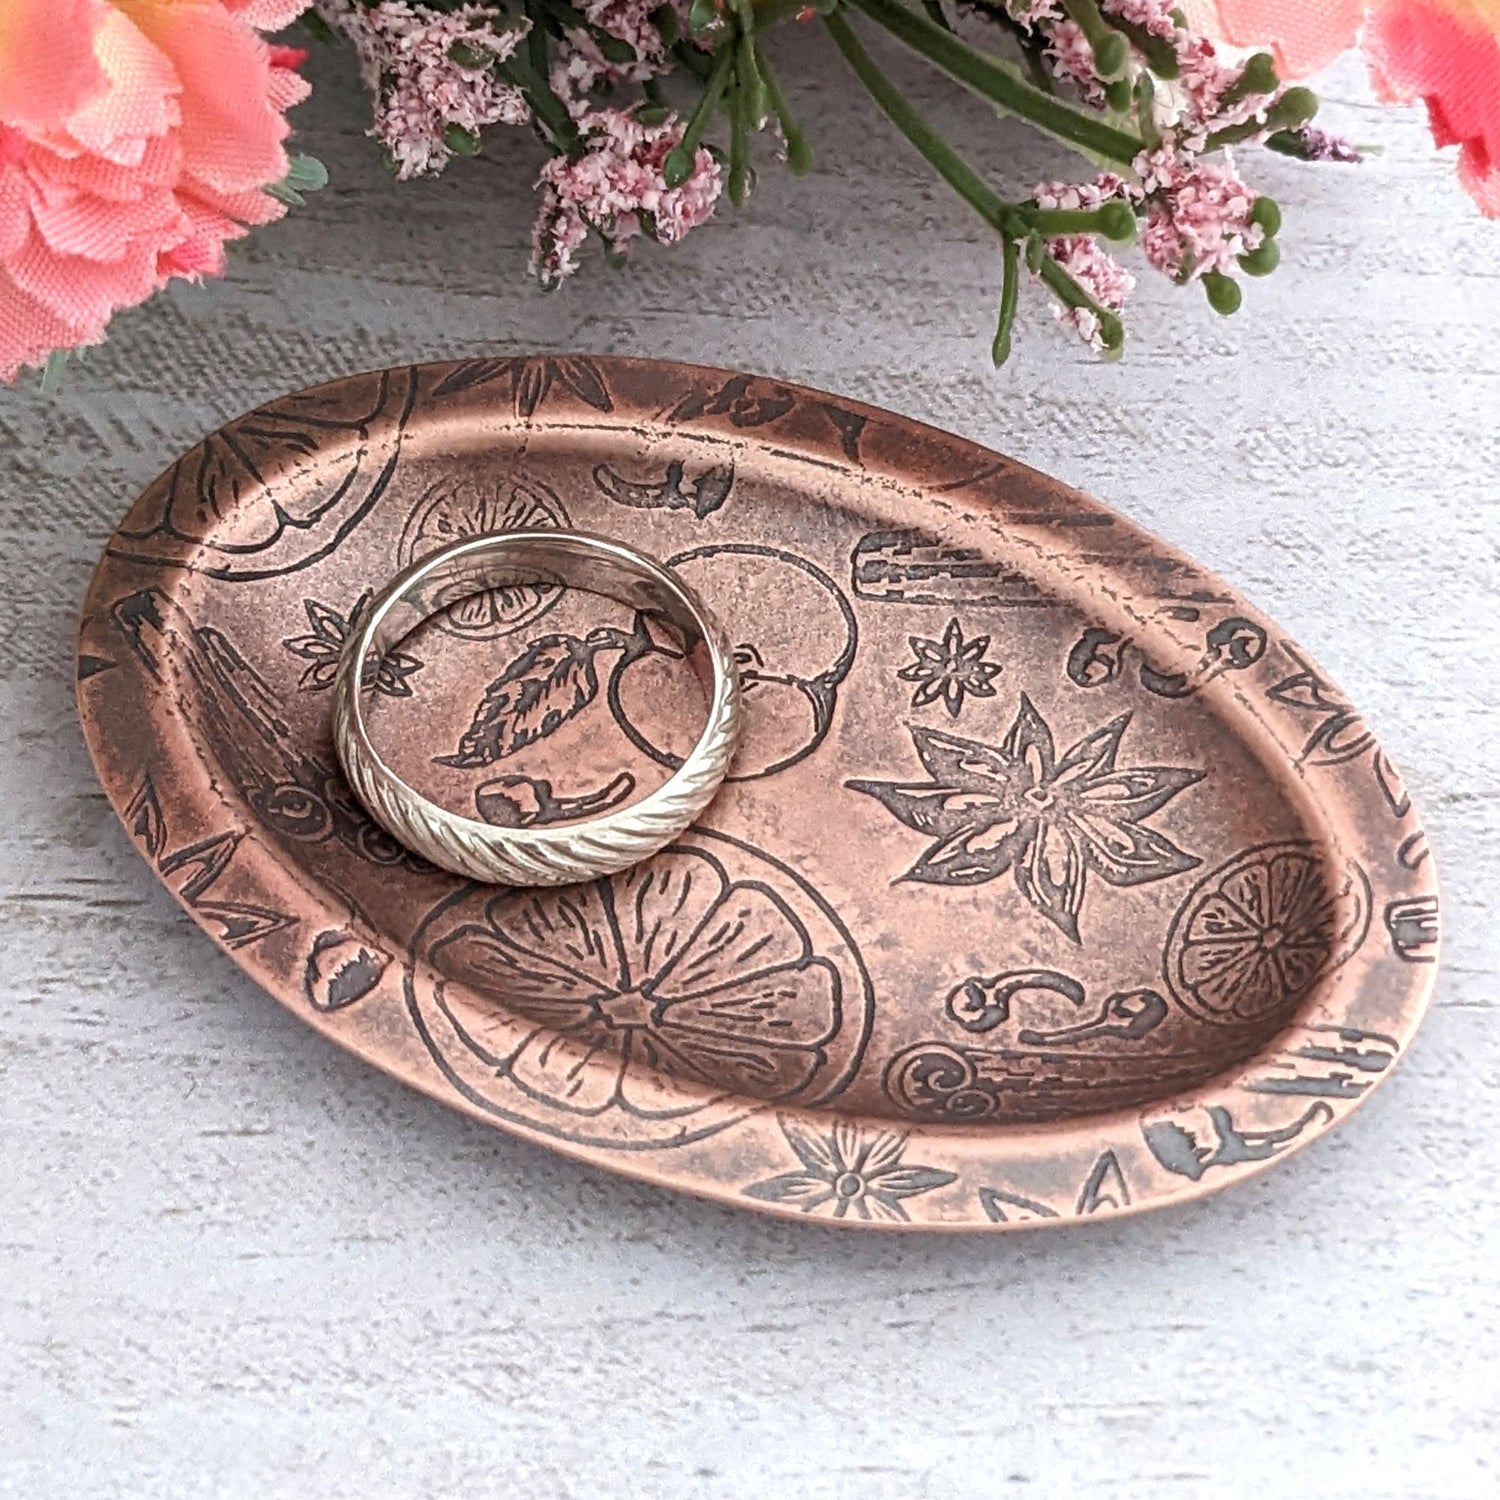 Copper oval ring dish with design of ingredients used in winter spice drinks, including apples oranges nutmeg cinnamon and clove.  Dish is 2 inches by three inches with a raised lip.